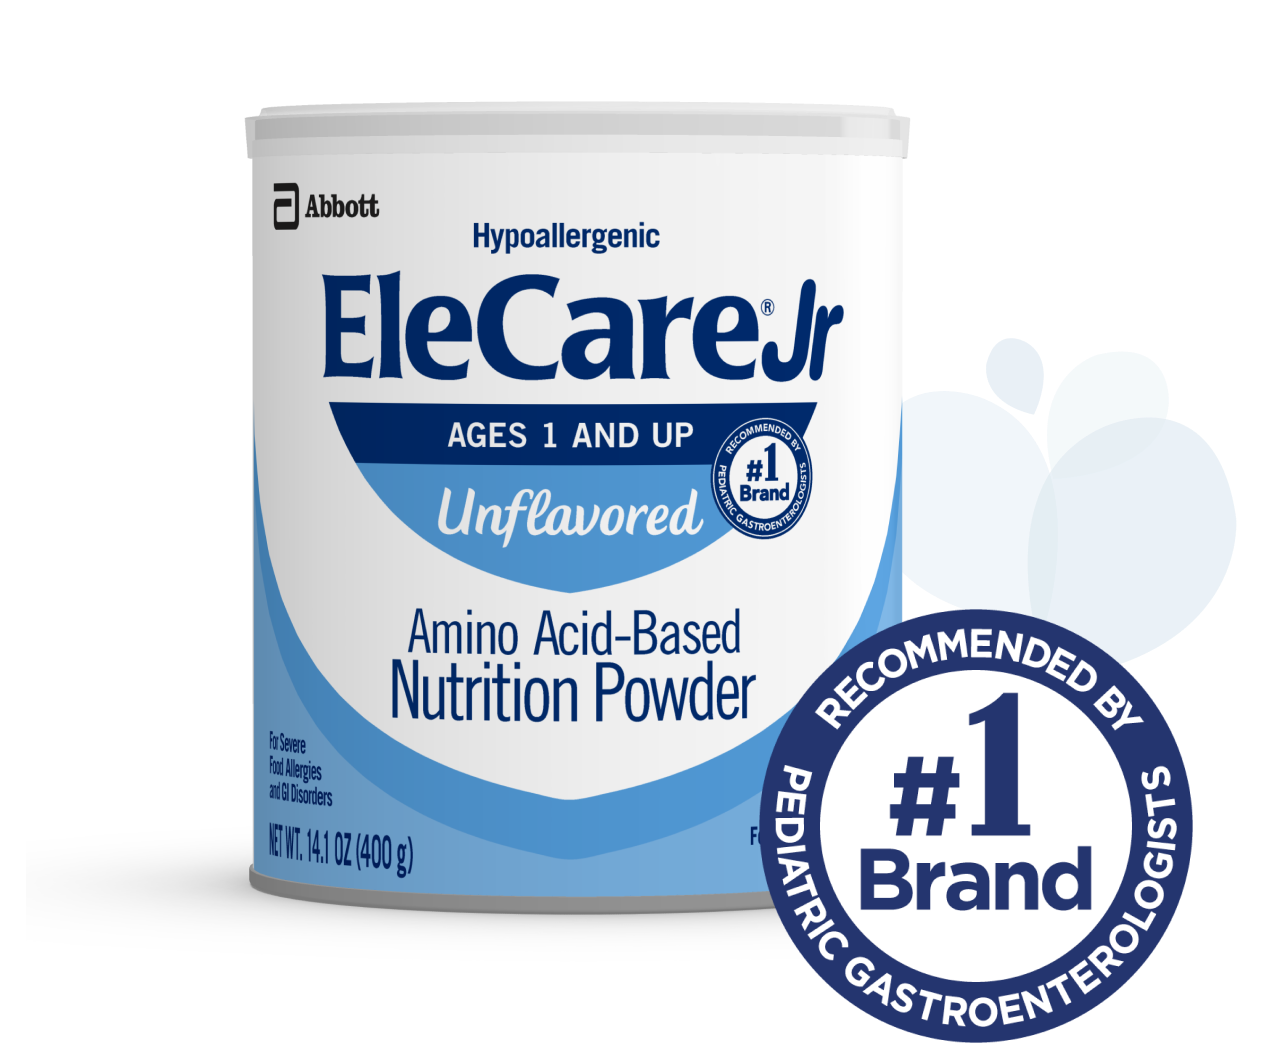 Unflavored EleCare Jr product image